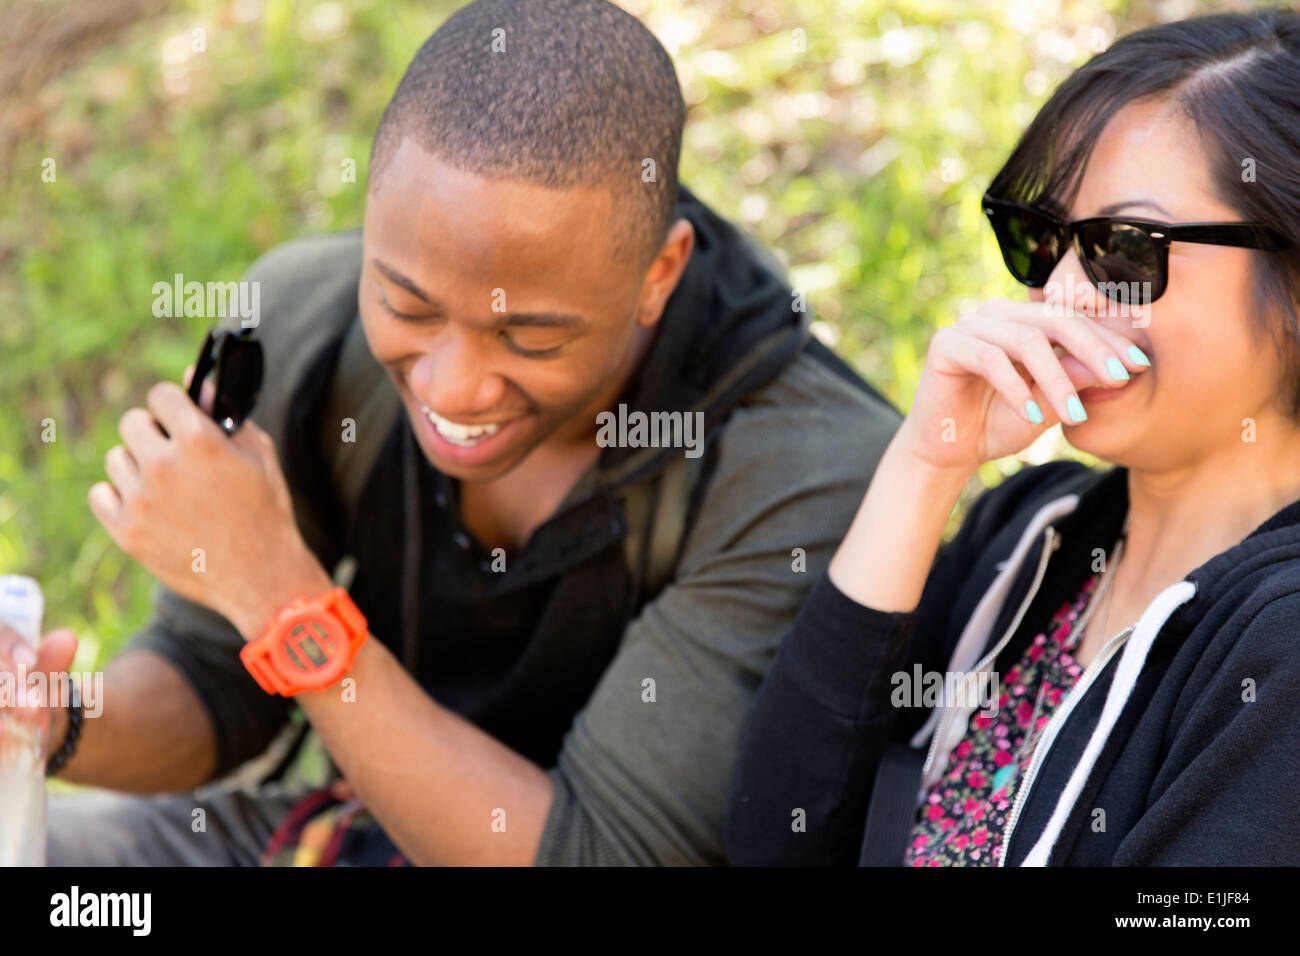 Young couple sitting in park laughing Banque D'Images